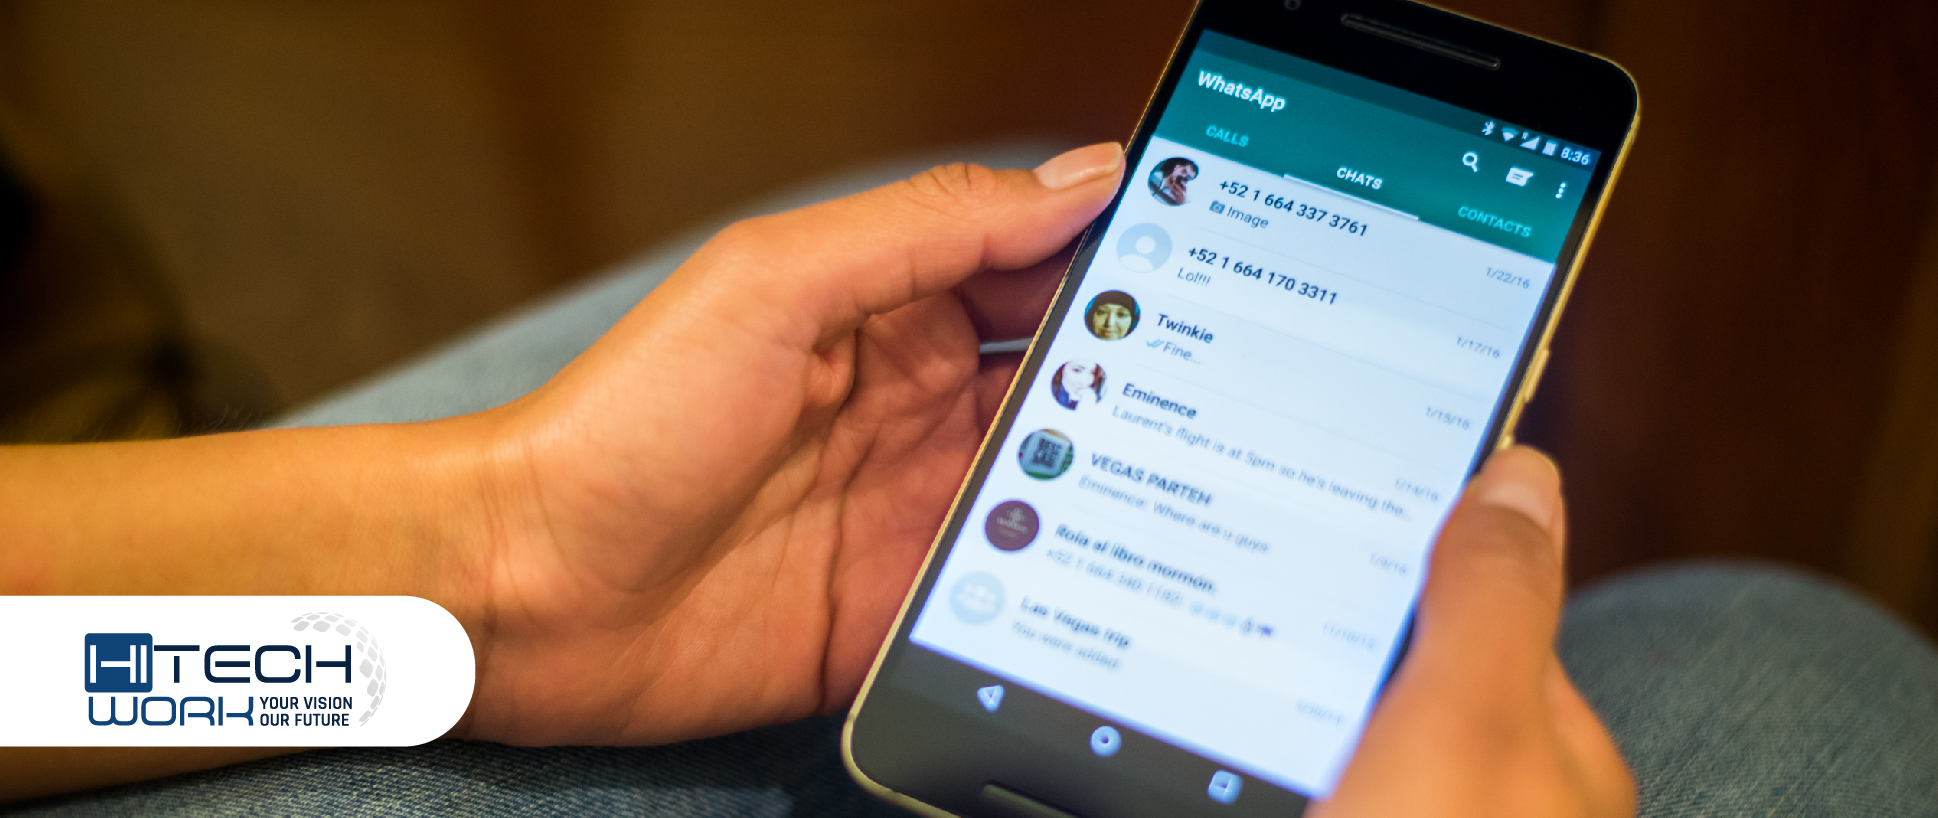 WhatsApp to Launch Latest Audio Chat Feature